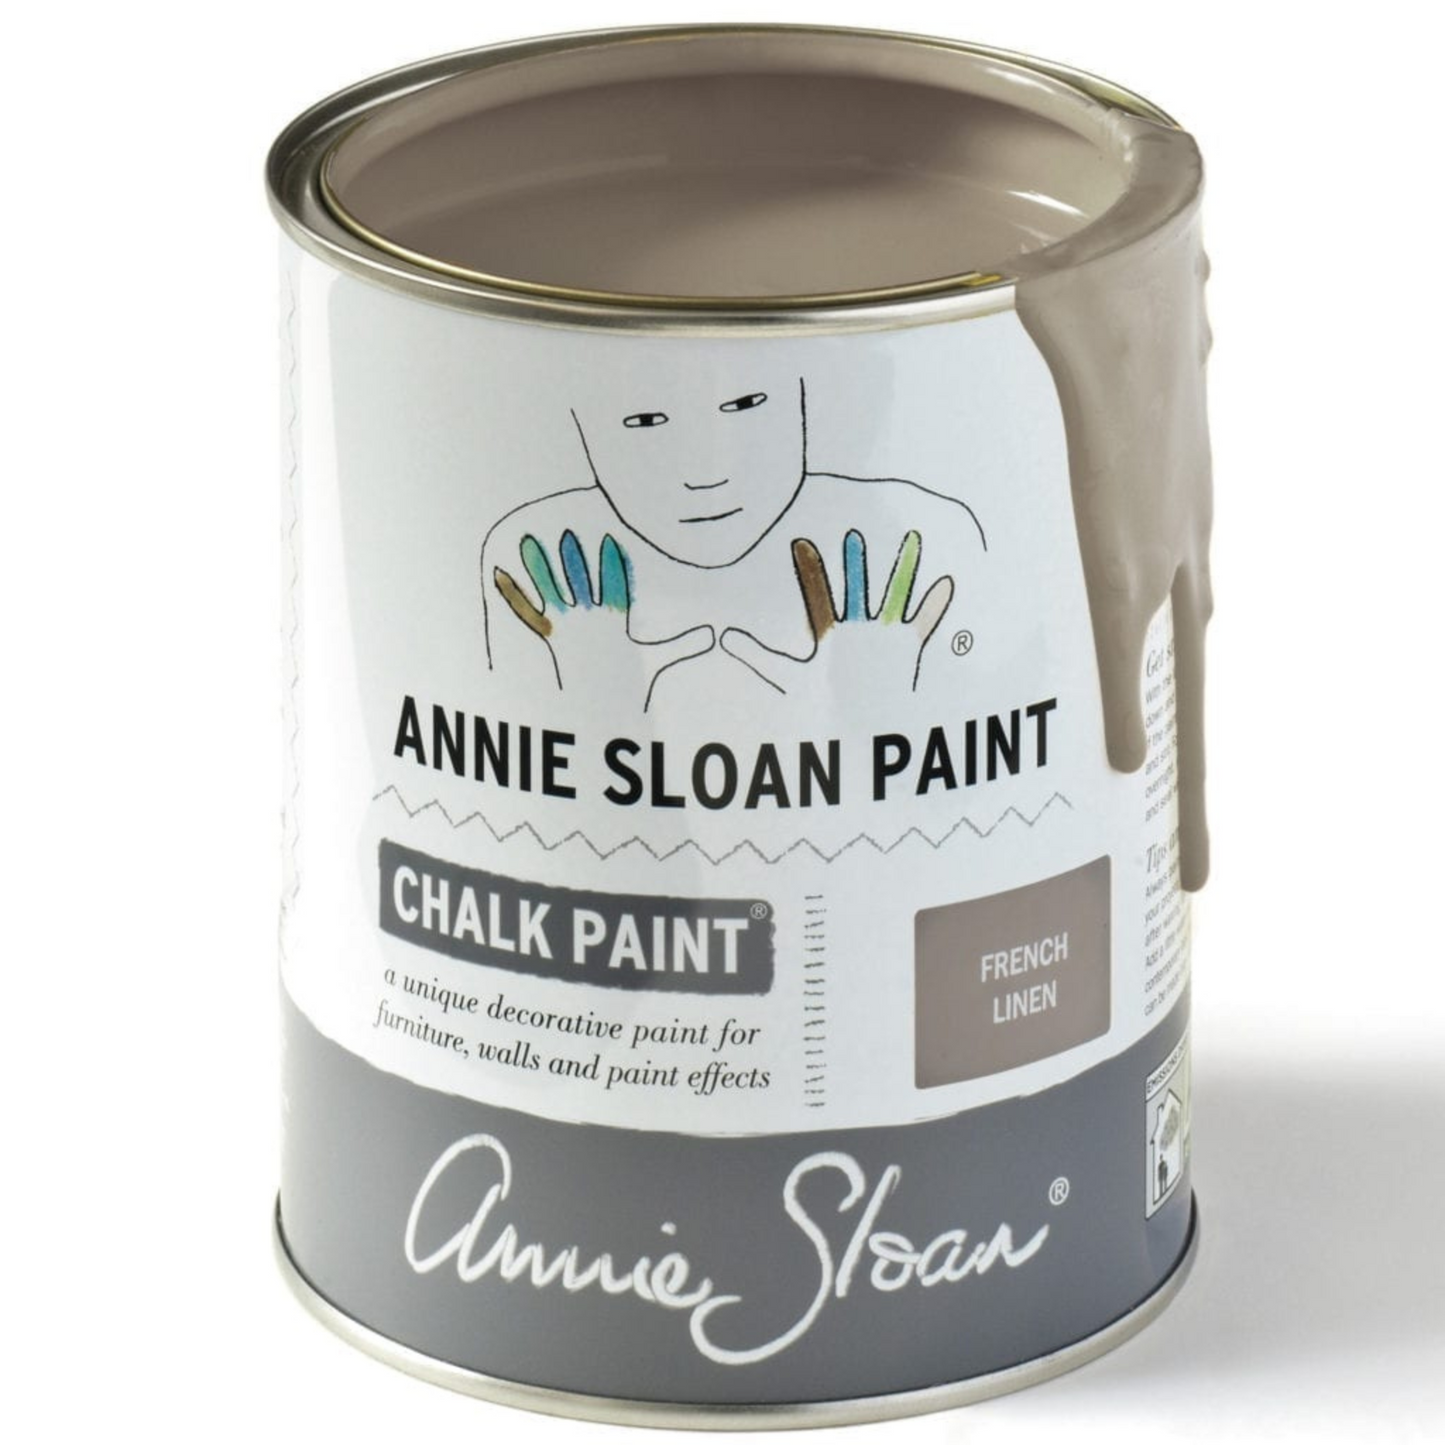 Can of French Linen Annie Sloan Chalk Paint.